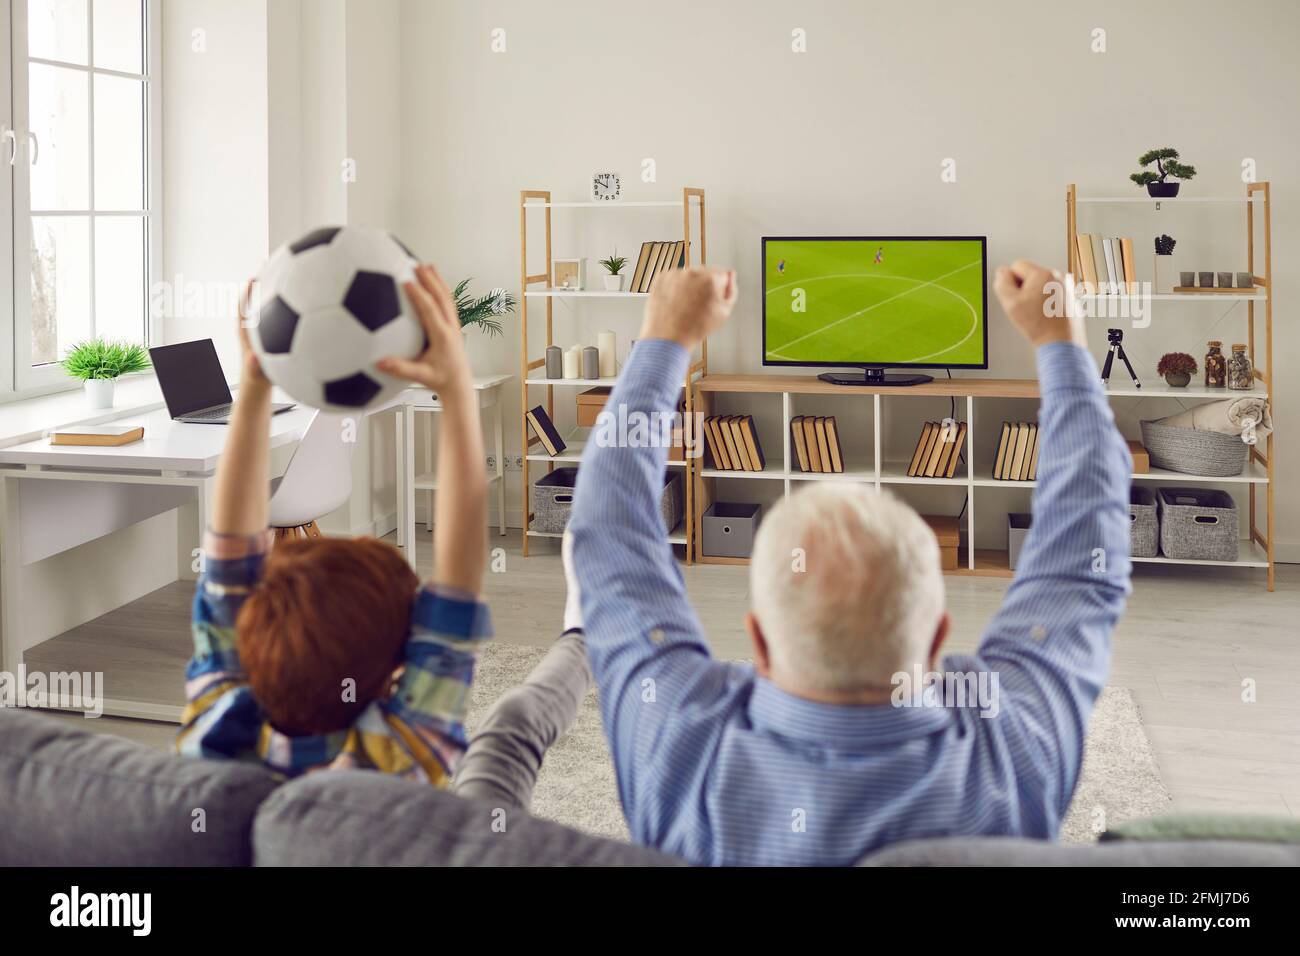 Grandfather and grandson sitting on sofa, watching soccer and supporting favorite team Stock Photo